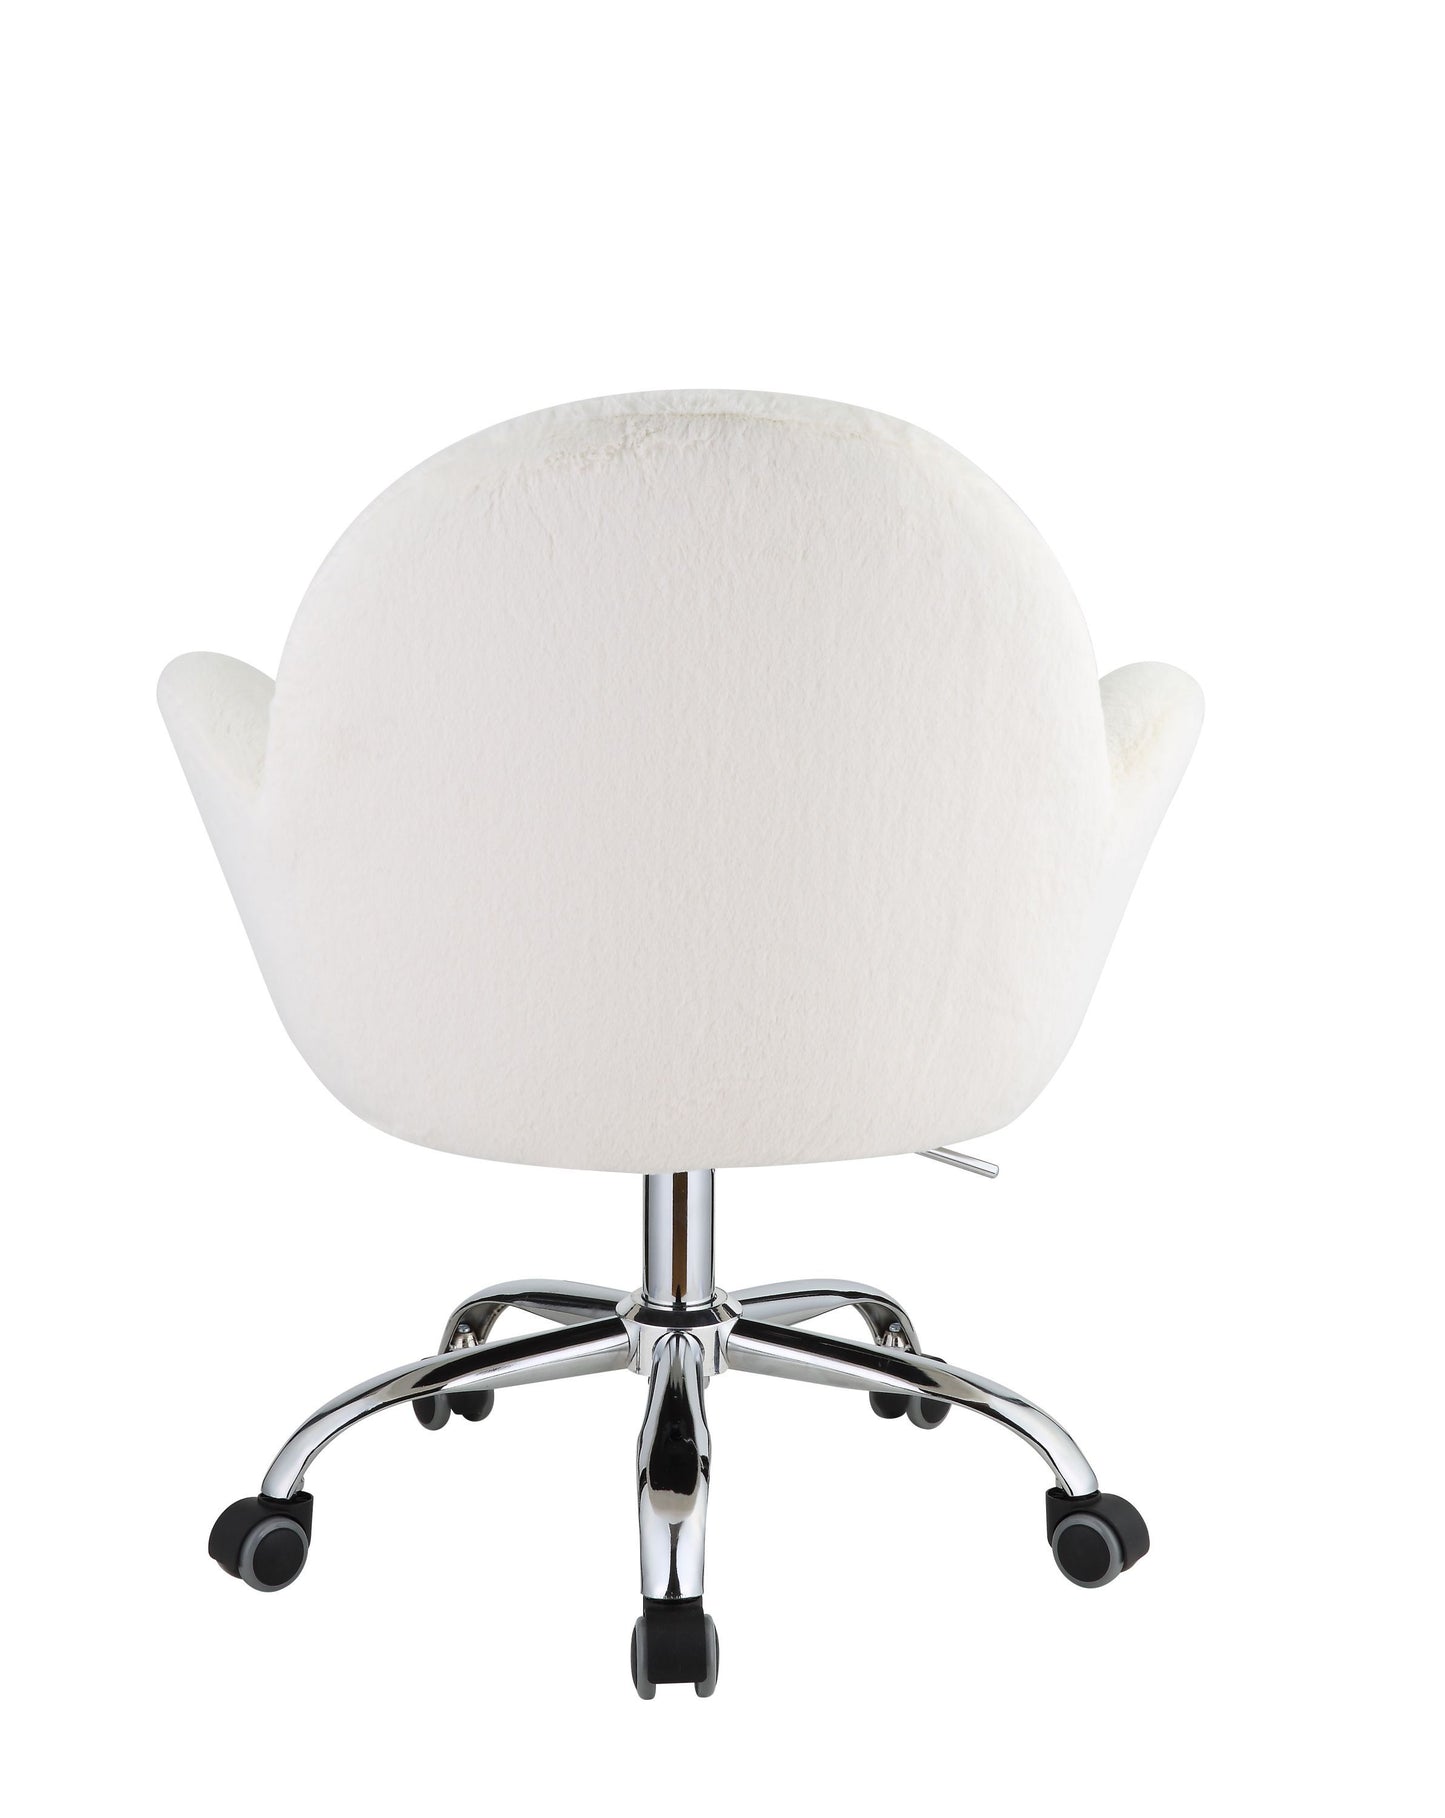 ACME Jago Office Chair in White Lapin & Chrome Finish OF00119